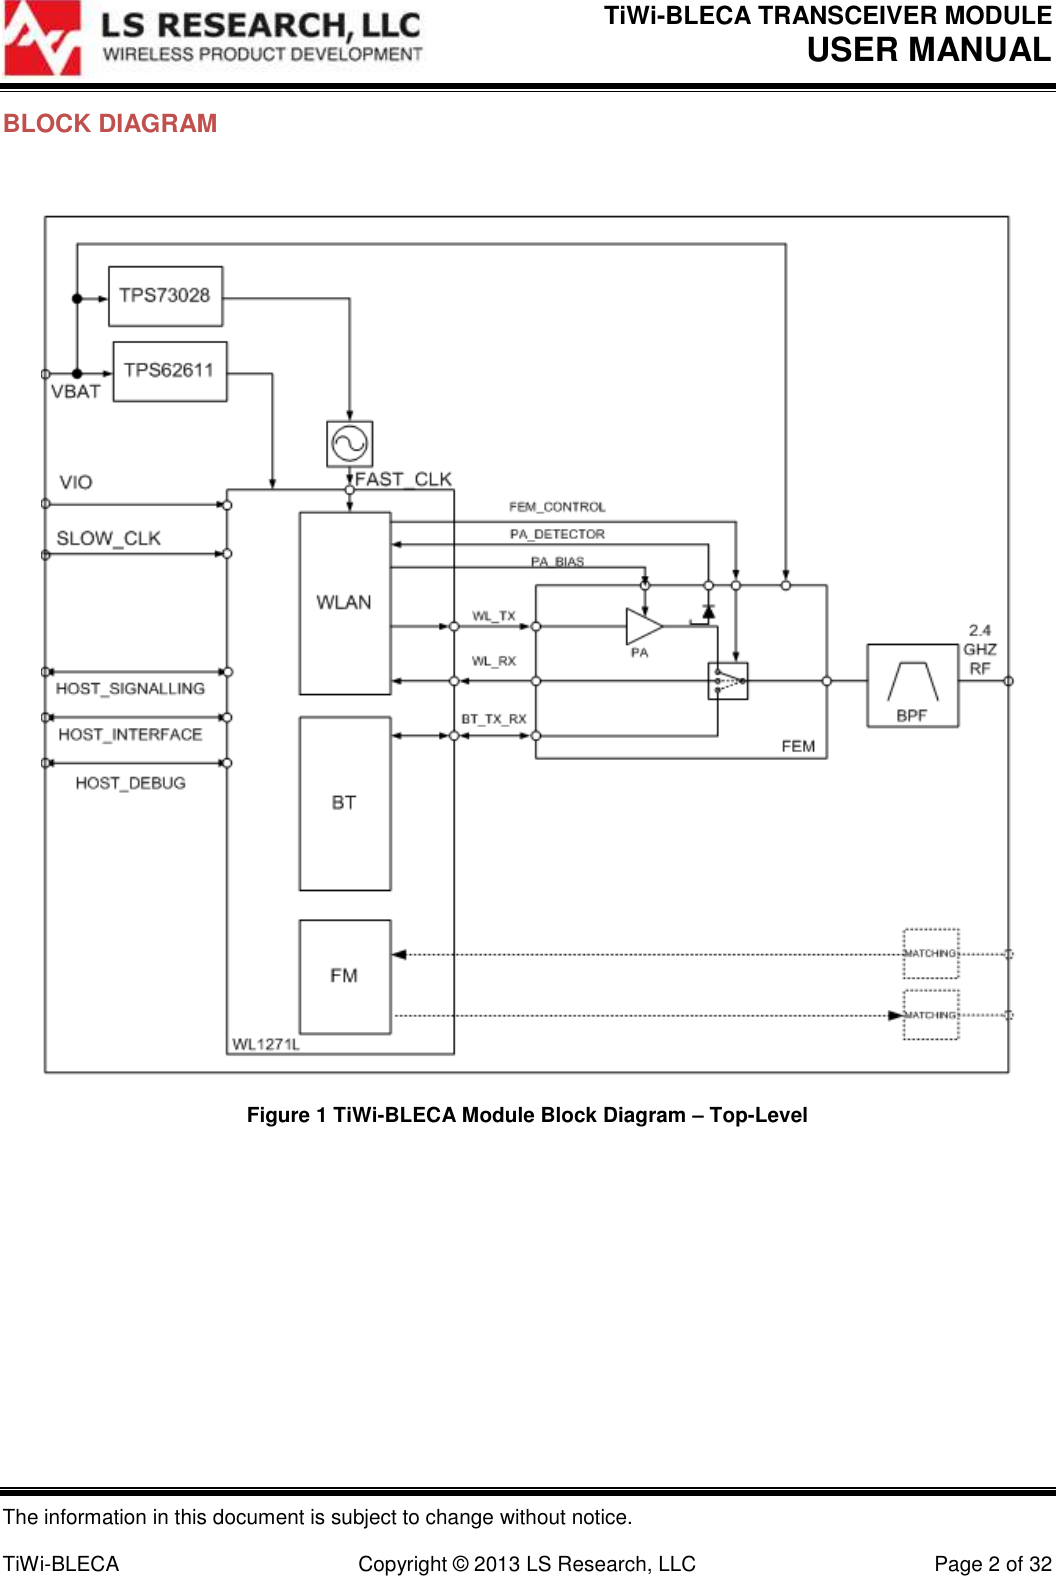 TiWi-BLECA TRANSCEIVER MODULE USER MANUAL   The information in this document is subject to change without notice.  TiWi-BLECA  Copyright © 2013 LS Research, LLC  Page 2 of 32 BLOCK DIAGRAM   Figure 1 TiWi-BLECA Module Block Diagram – Top-Level   